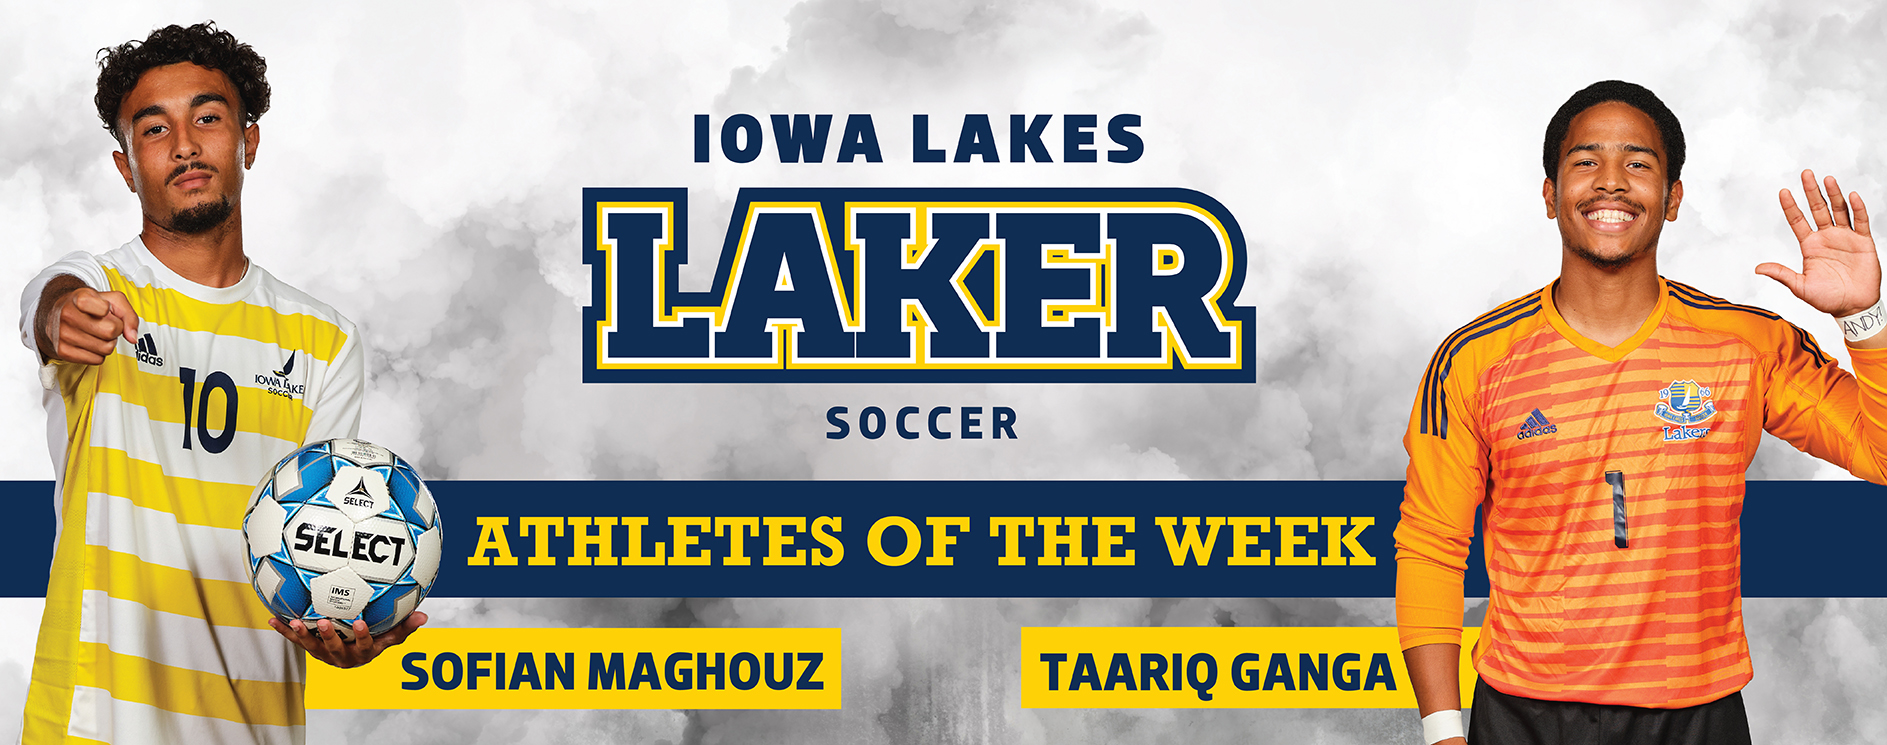 Maghouz and Ganga Named Conference Player of the Week